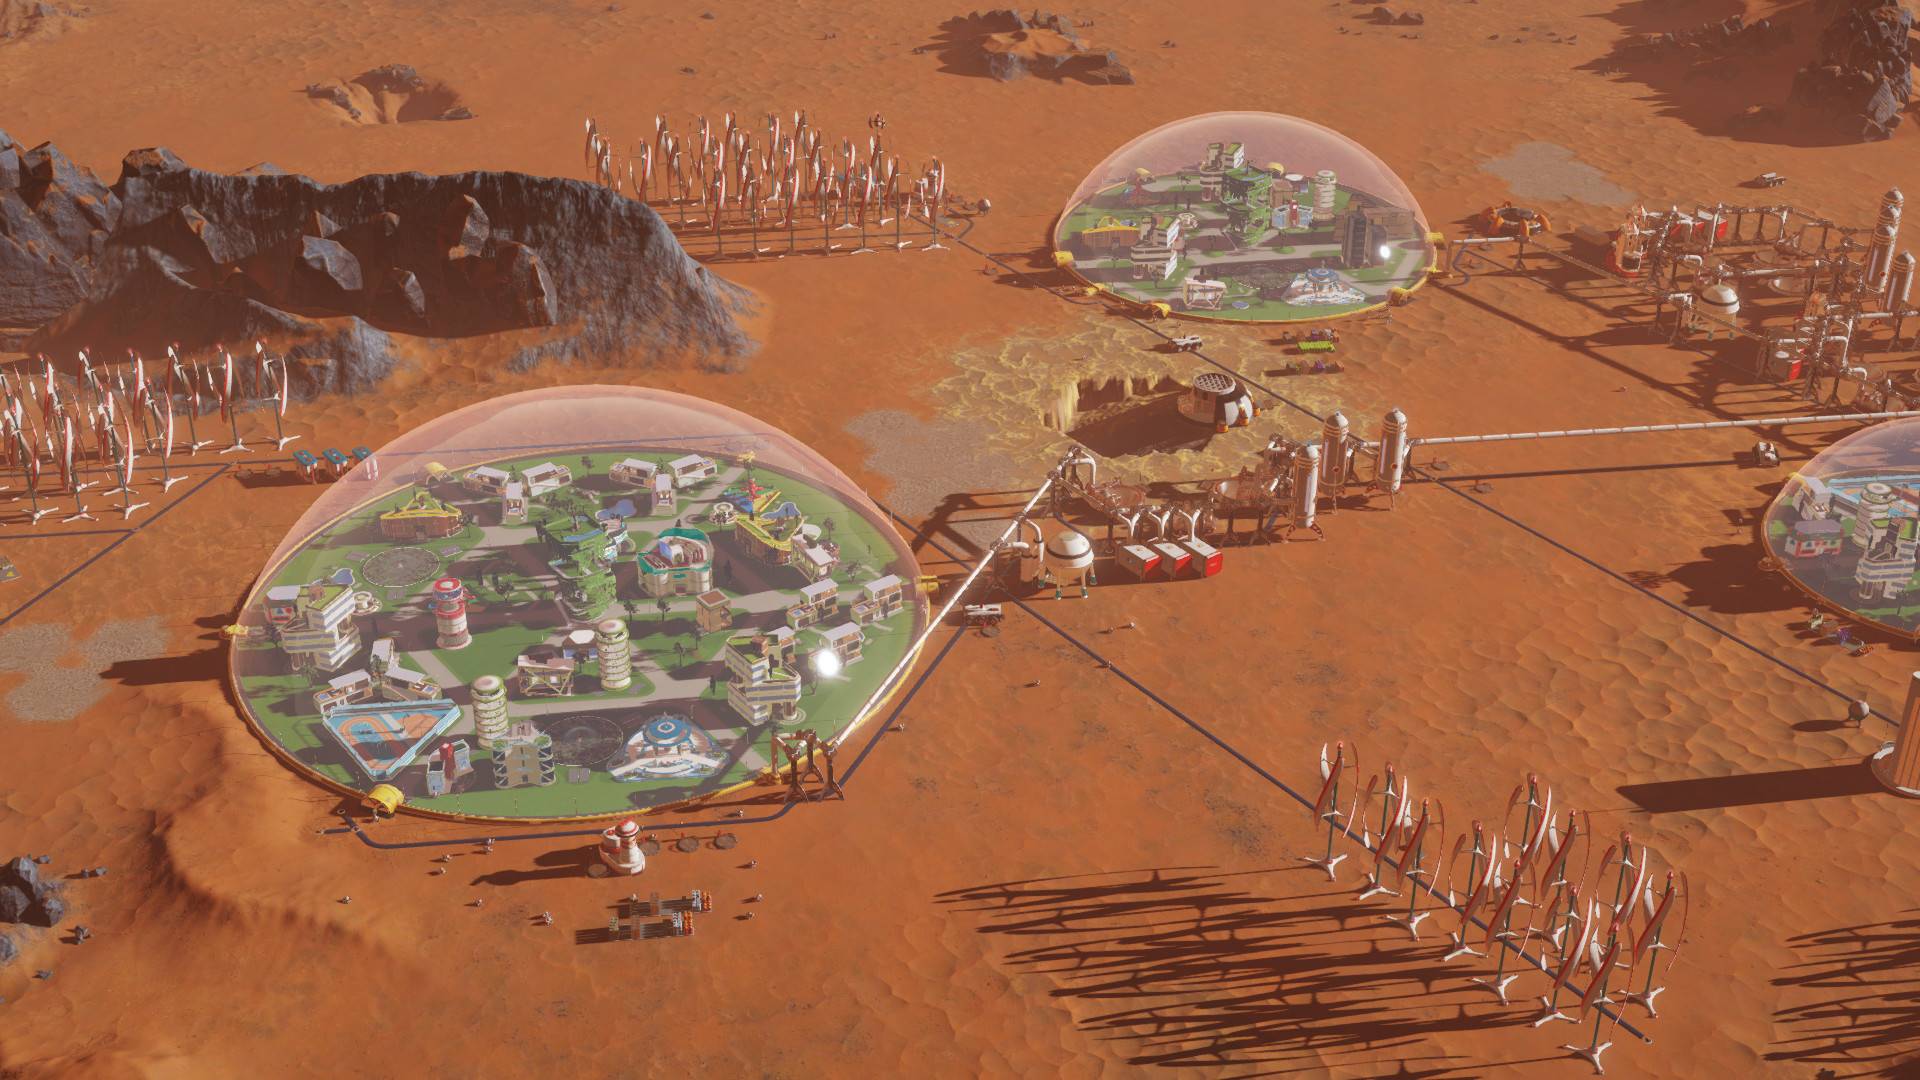 Best city-building games: Surviving Mars. Image shows two settlements on Mars within biospheres.